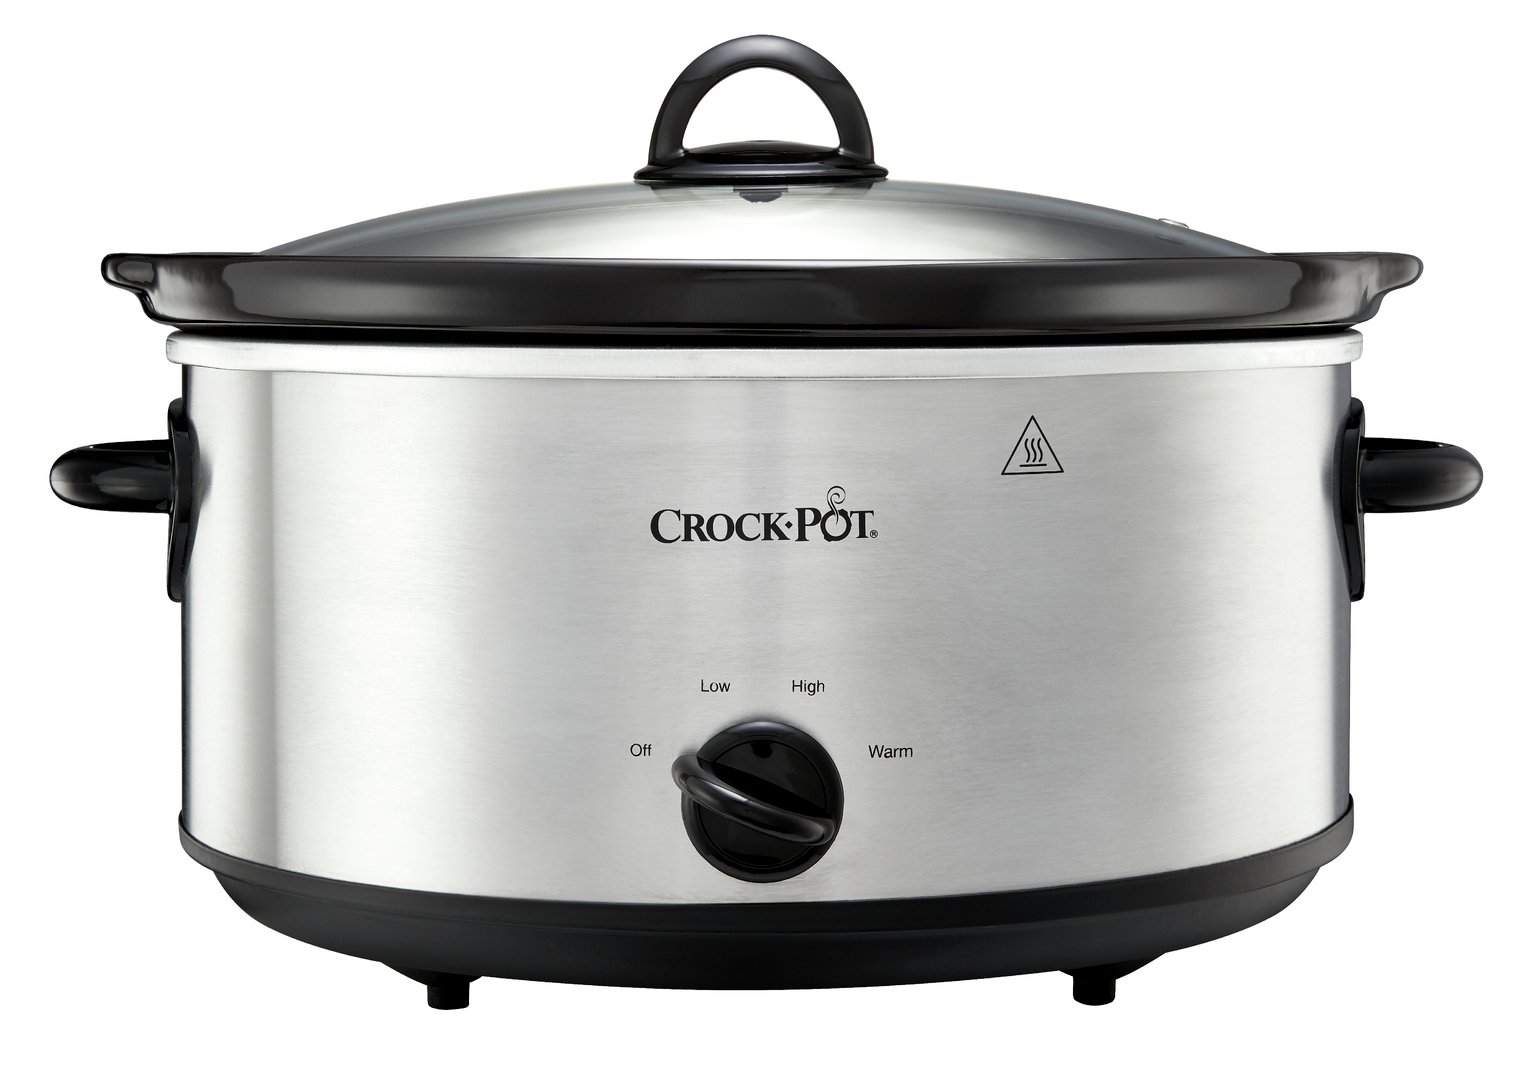 Crockpot 5.6L Slow Cooker - Stainless Steel